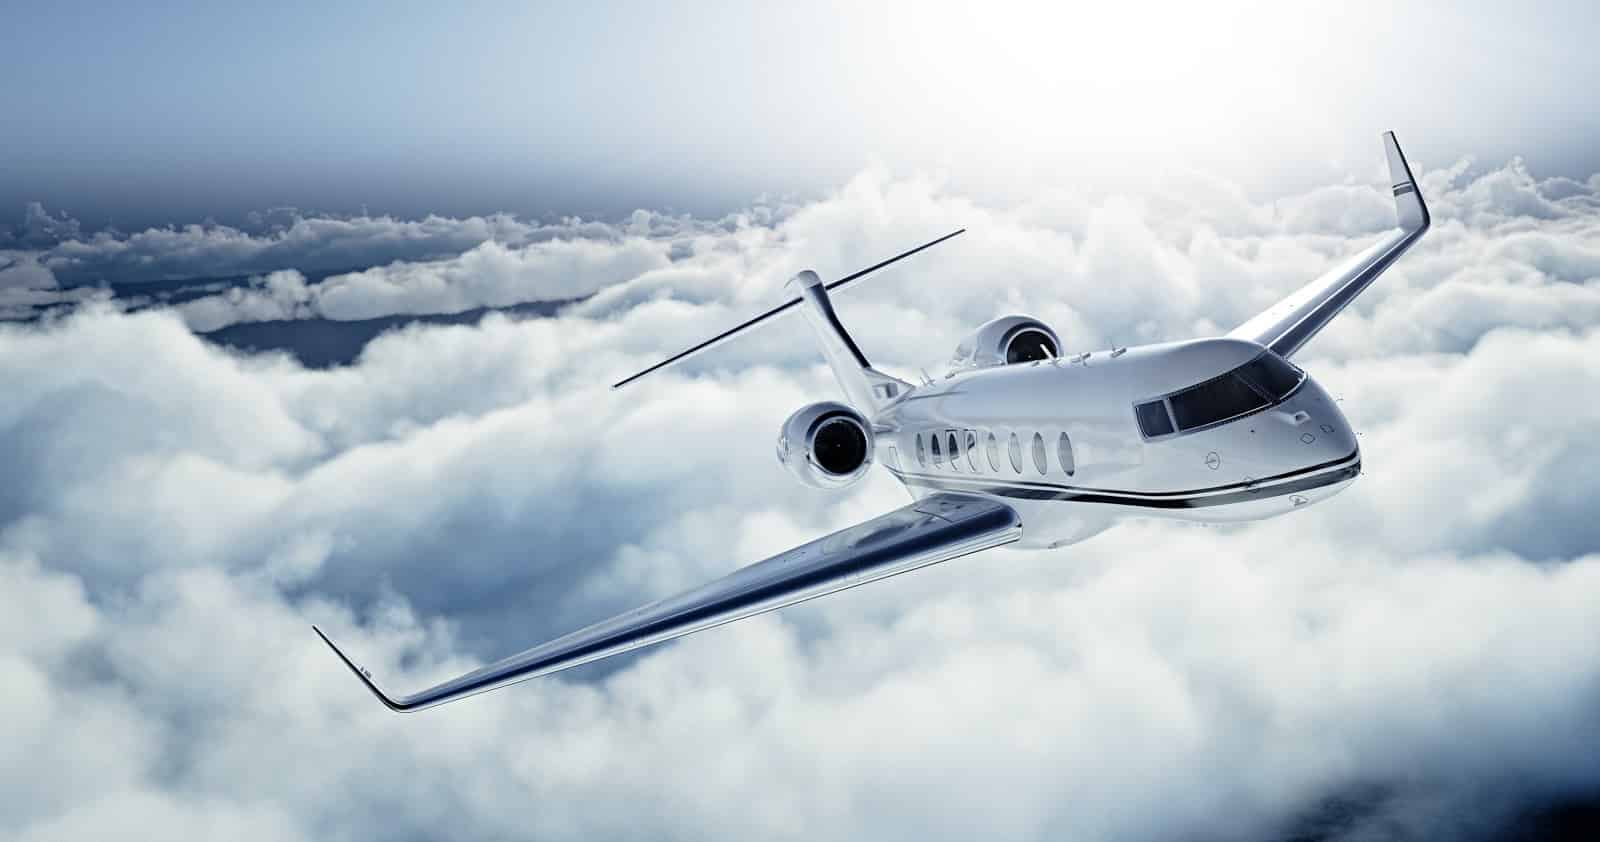 A private jet flying through the clouds